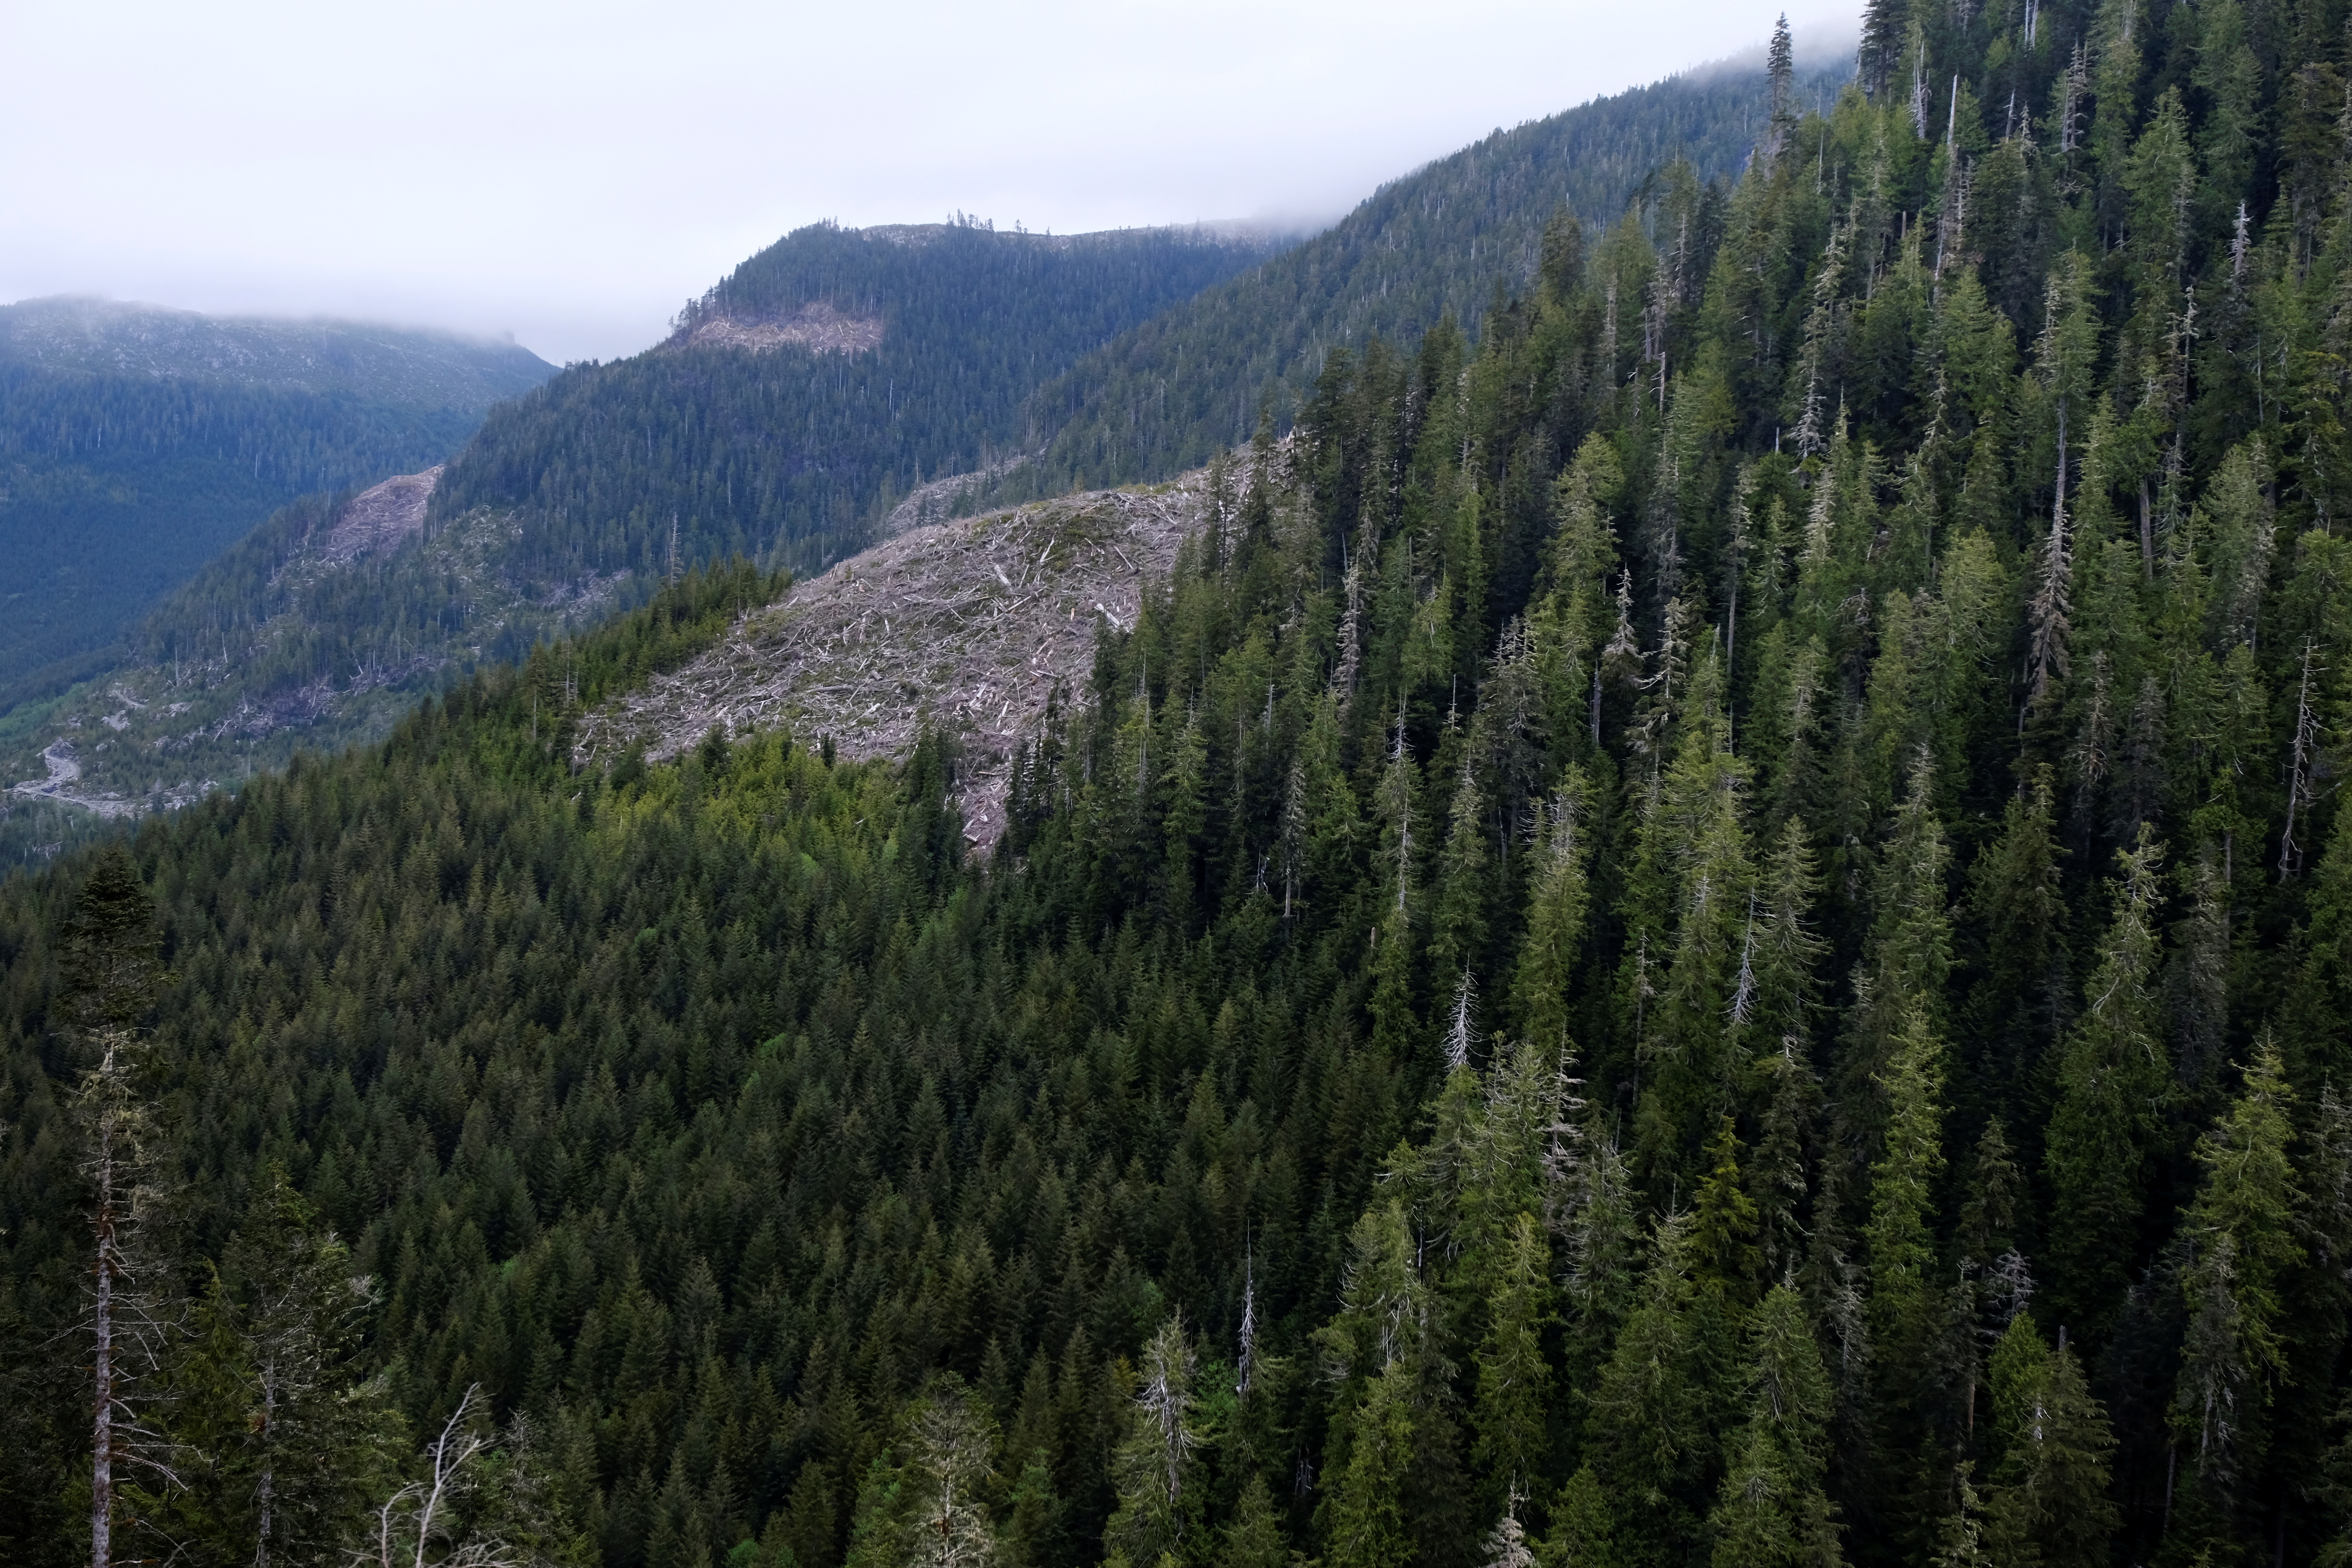 Large trees among old growth timber are seen at right in a cut block of Tree Farm licence 46 located outside Port Renfrew